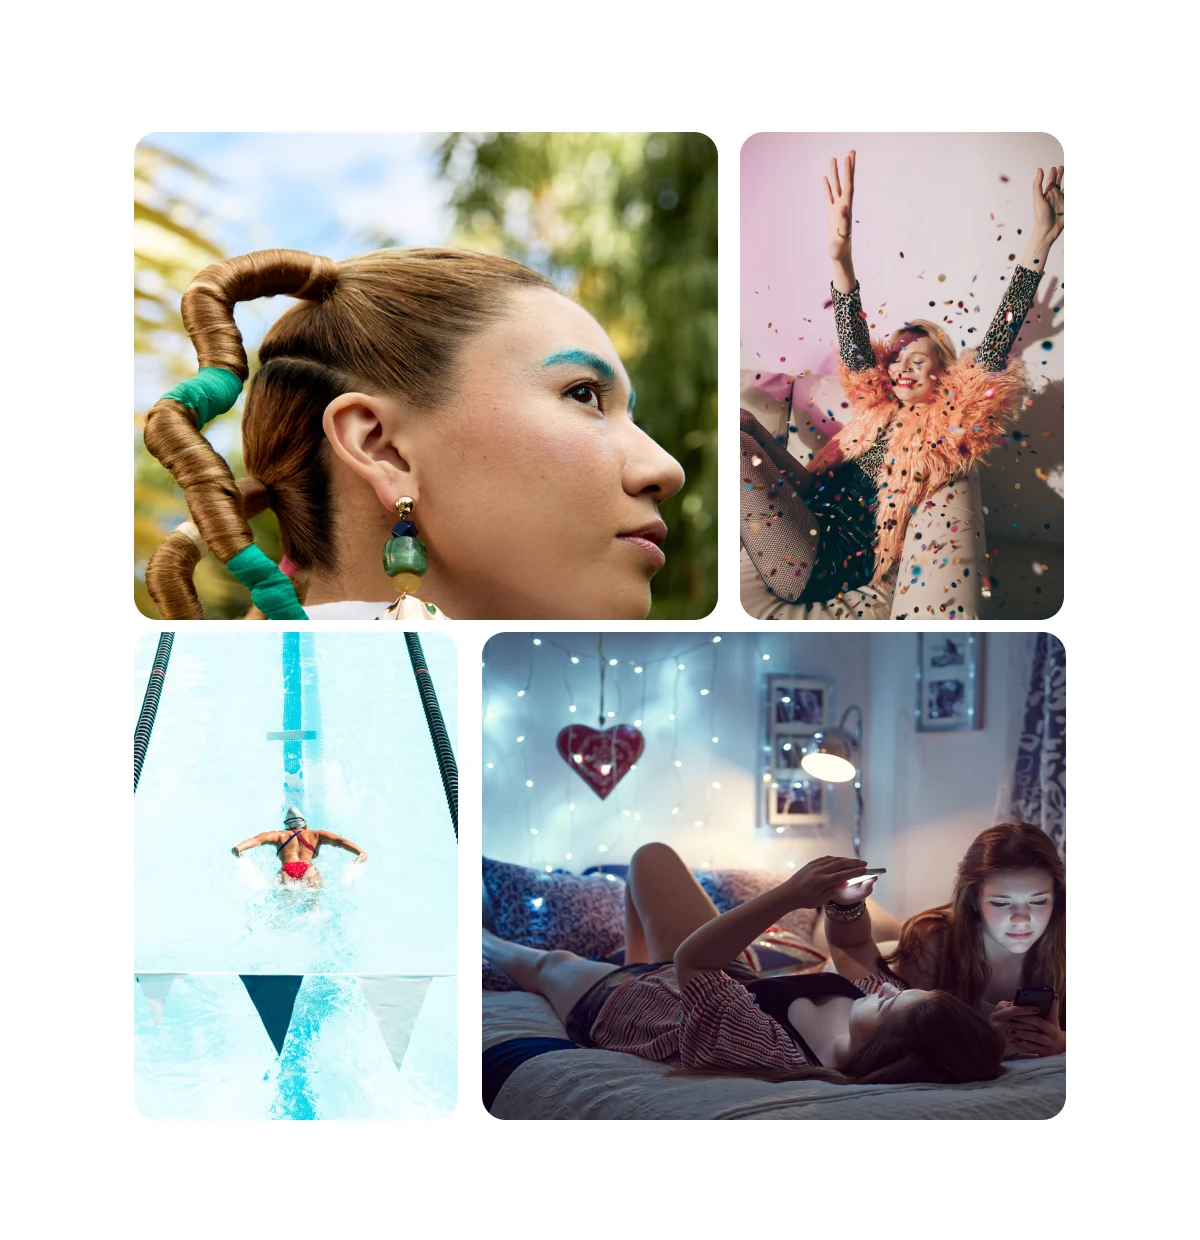  Pin grid featuring woman with blue eyebrows and wacky hair, woman sitting down throwing confetti, person swimming in olympic swimming pool, two girls in a bedroom on their phones.